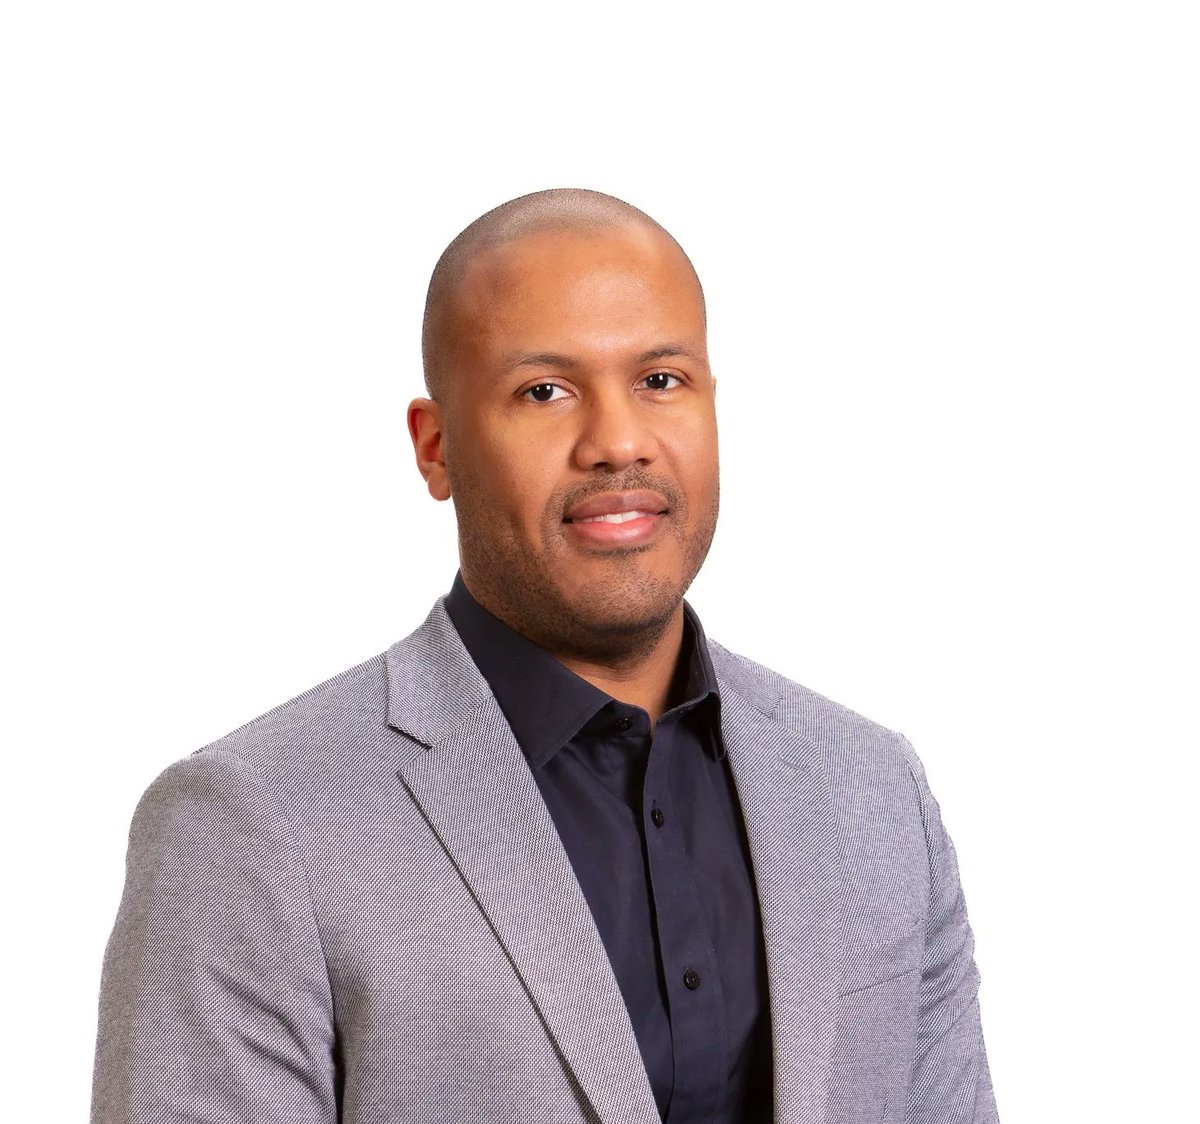 HealthPartners is excited to welcome our new Senior Director, Corporate Services, Didier Paultre! He joins us with over 15 years of experience in financial management, and has built his career on a strong foundation of academic and professional achievements.